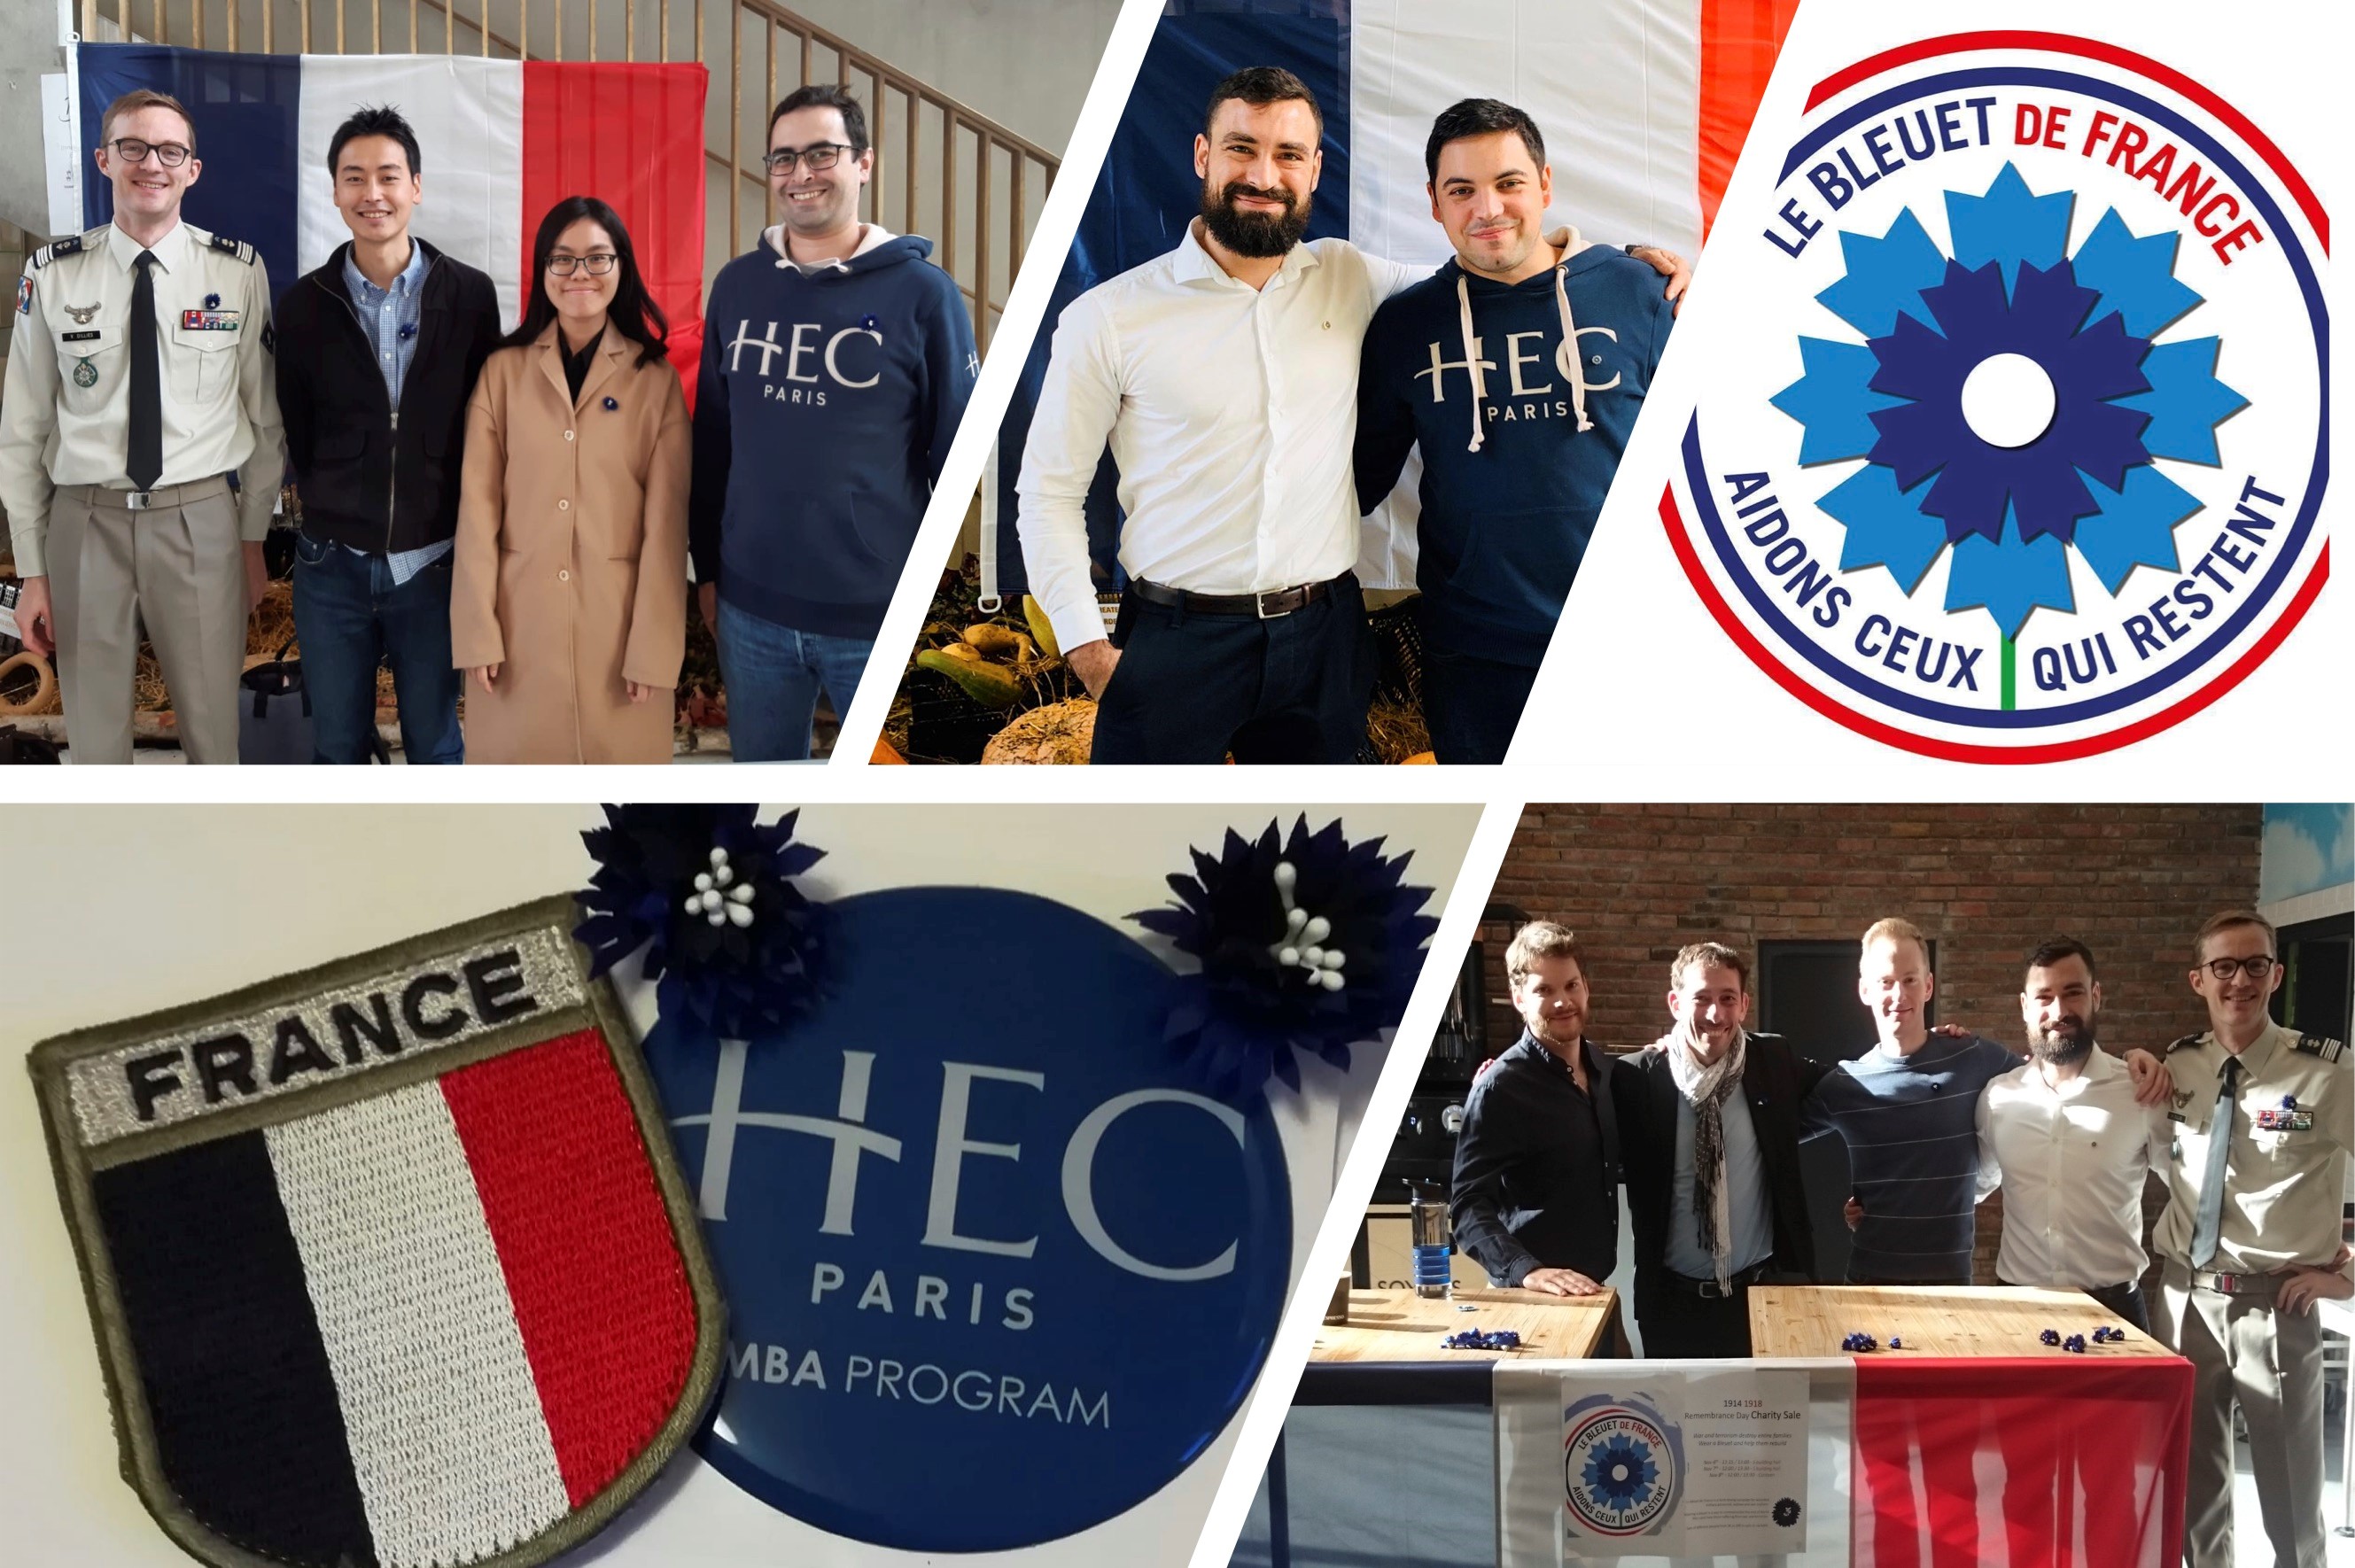 Three days of fundraising takes place at HEC Paris